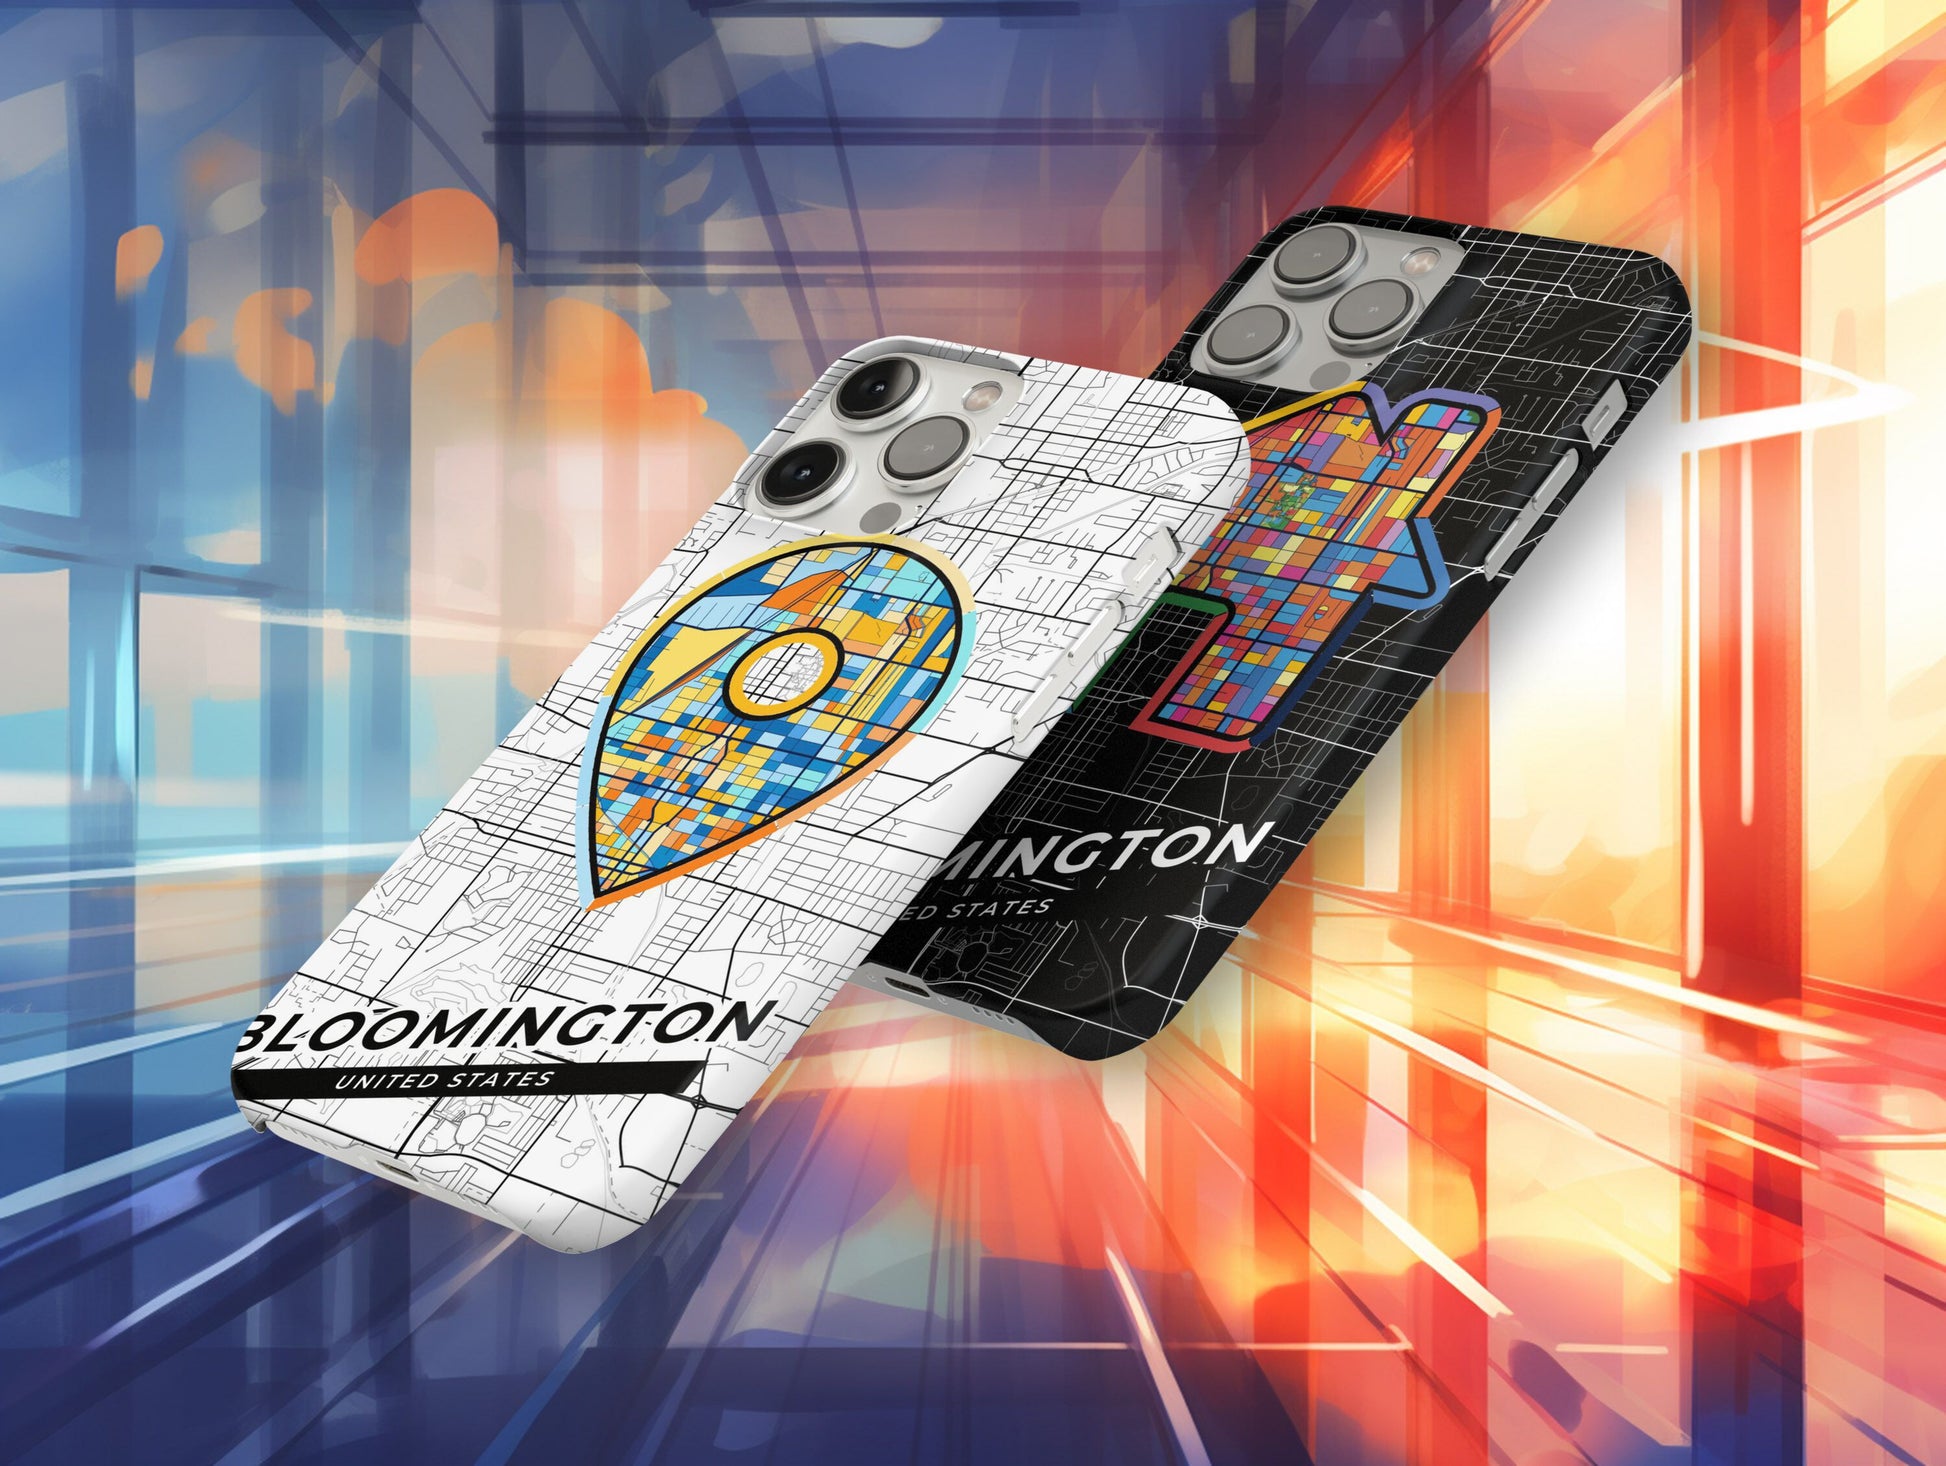 Bloomington Illinois slim phone case with colorful icon. Birthday, wedding or housewarming gift. Couple match cases.